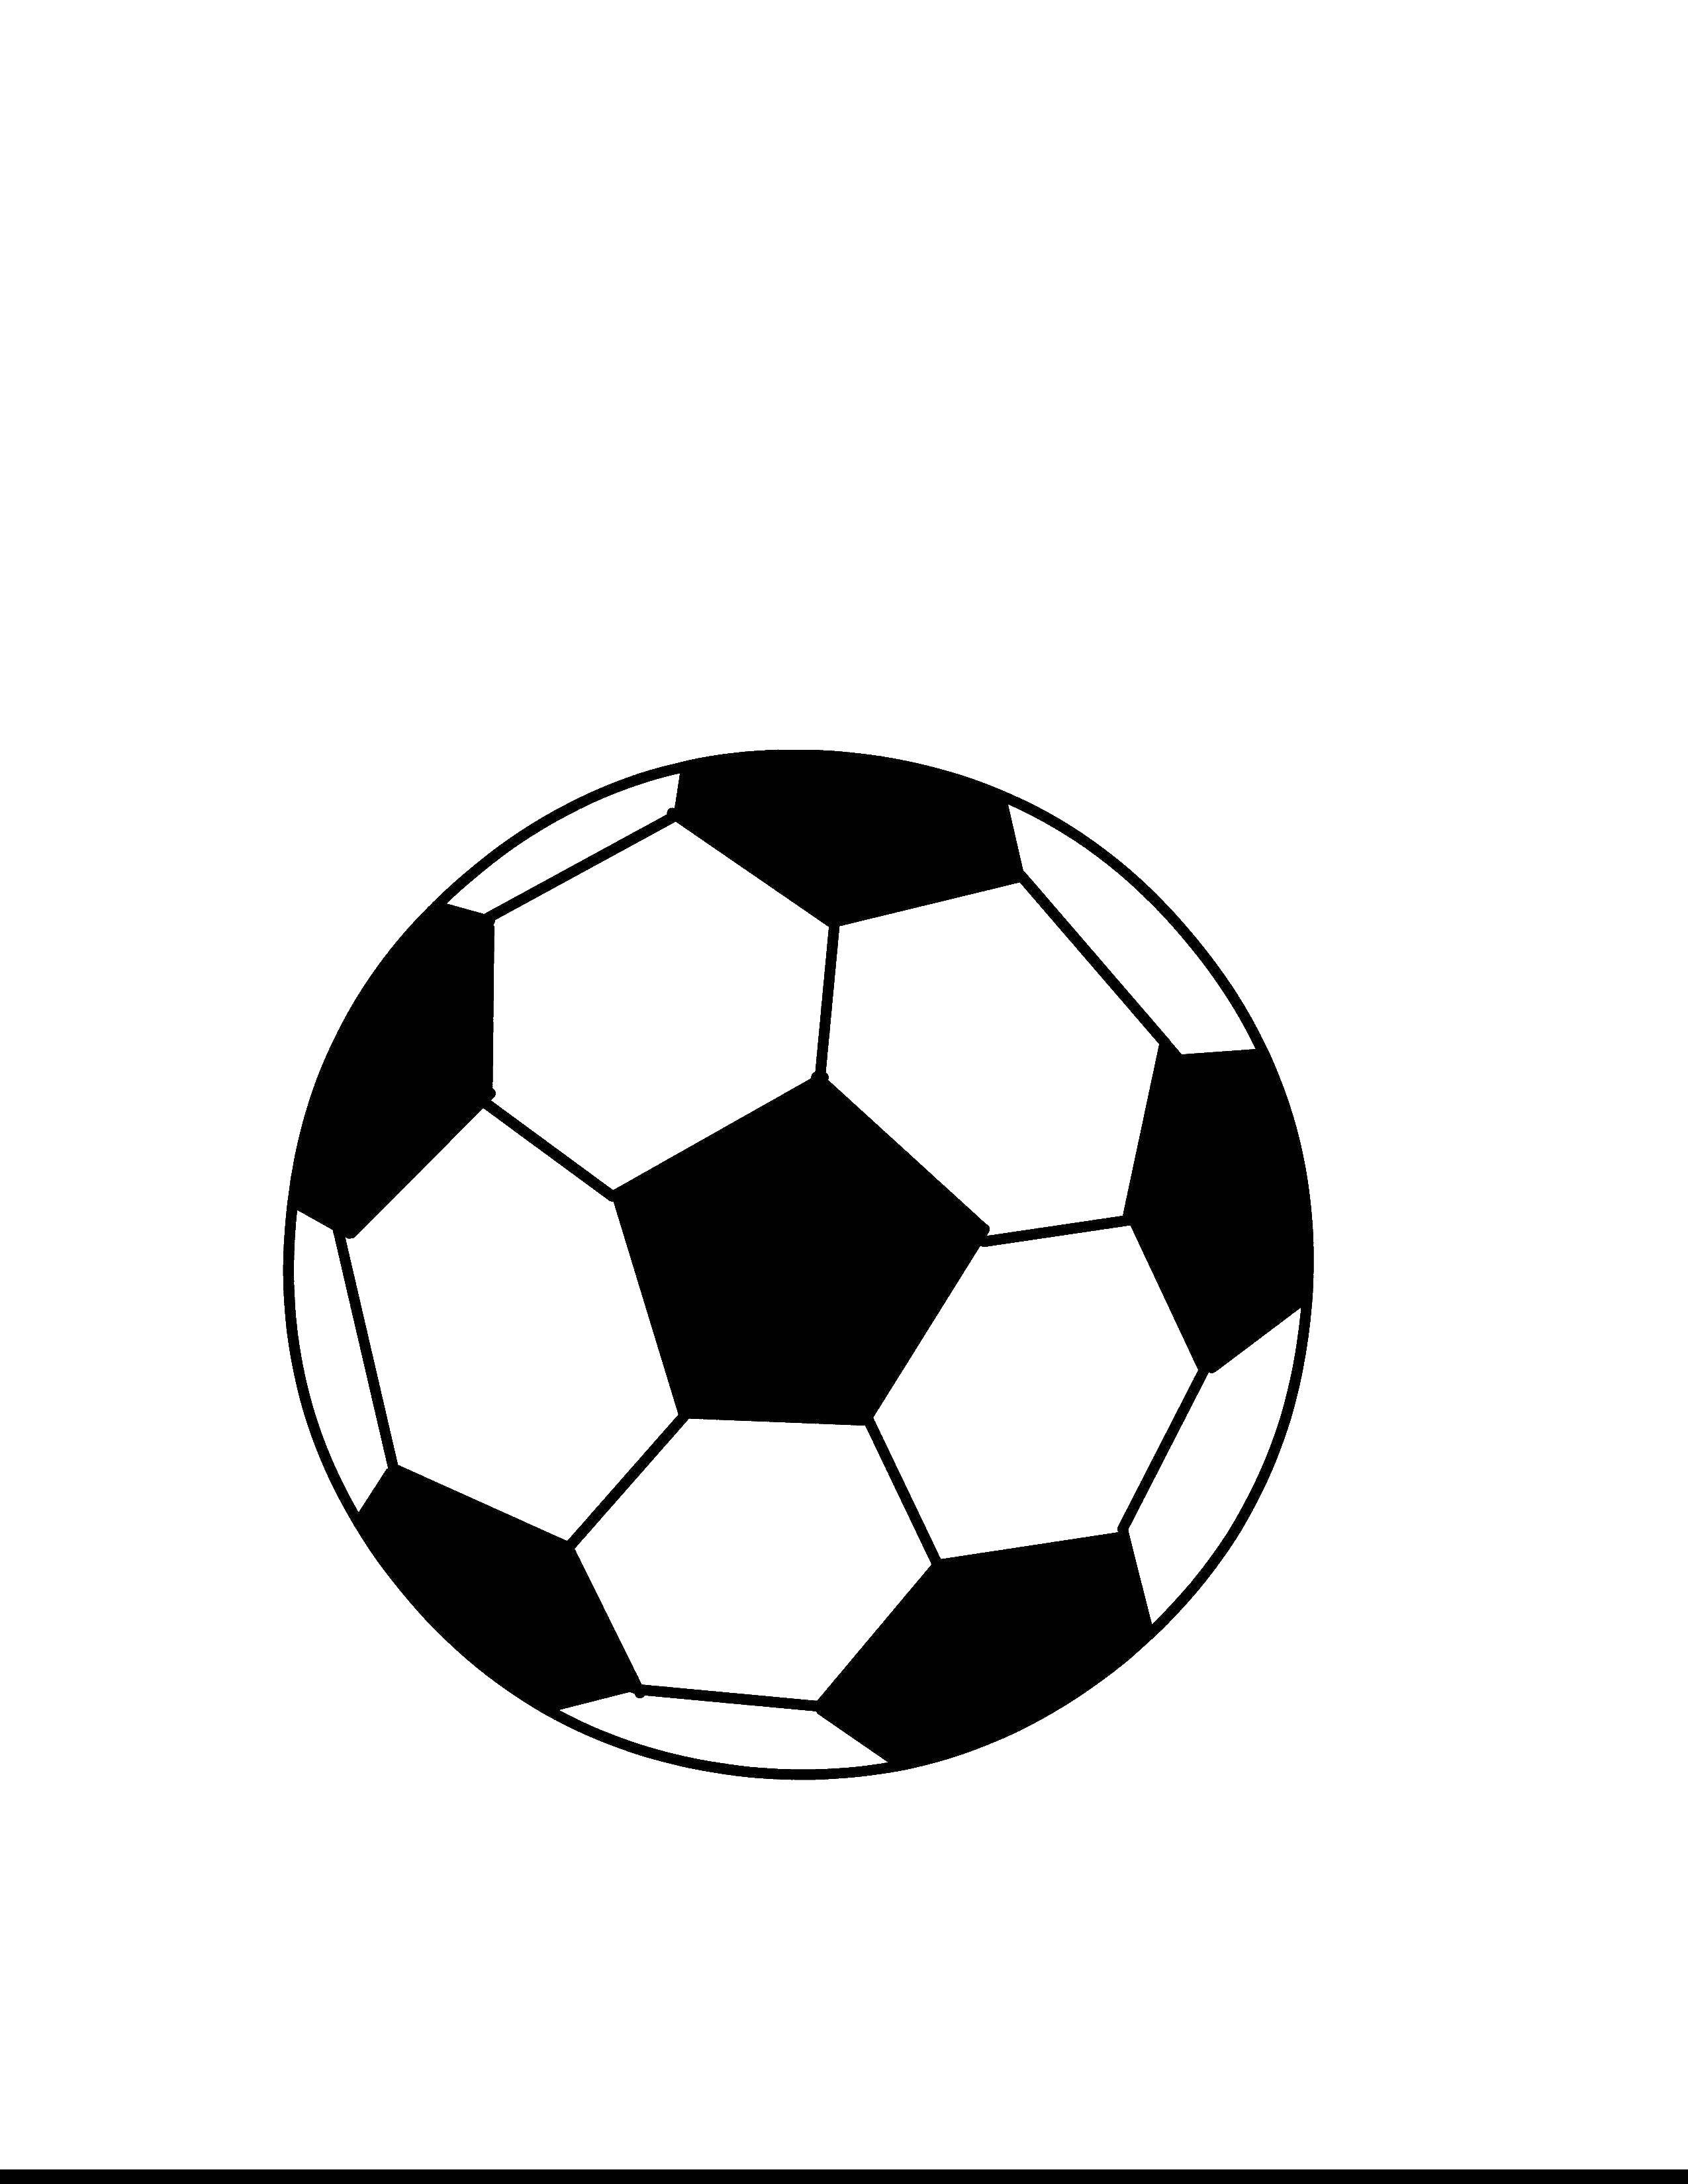 Coloring Soccer ball. Category Sports. Tags:  sports, soccer, soccer ball.